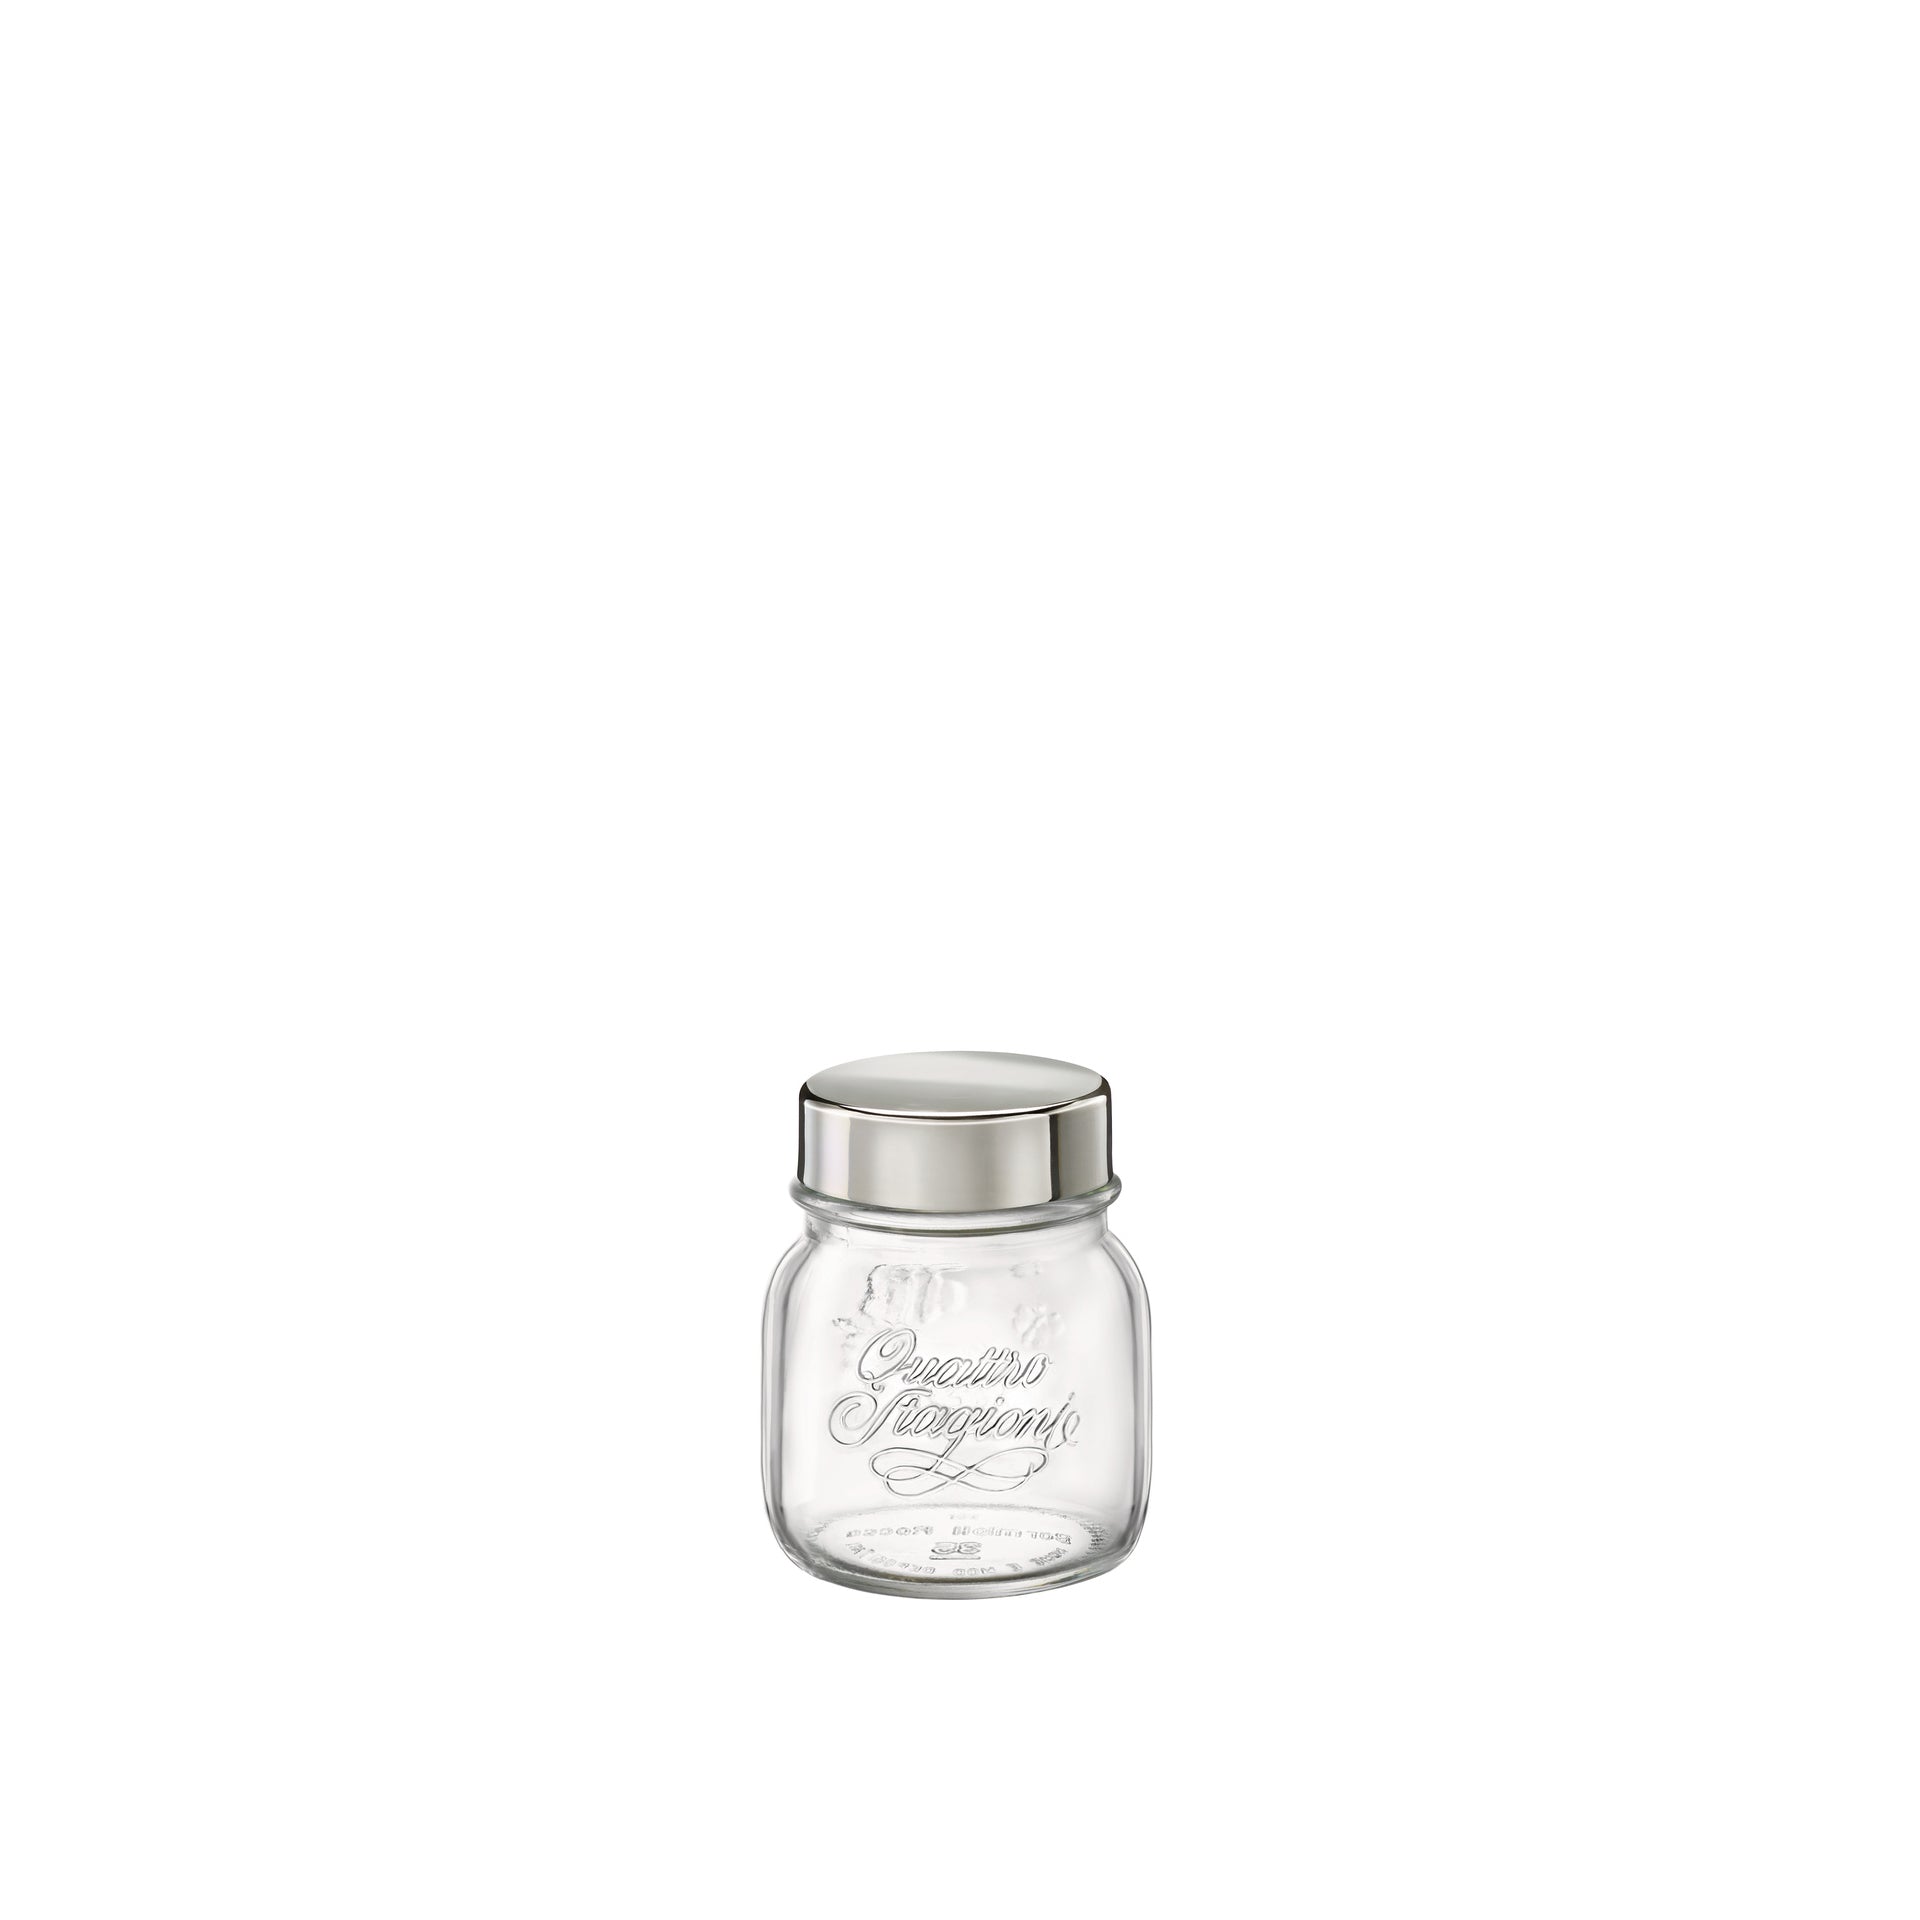 Quattro Stagioni 5 oz. Jar with Stainless Steel Lid (Set of 12)